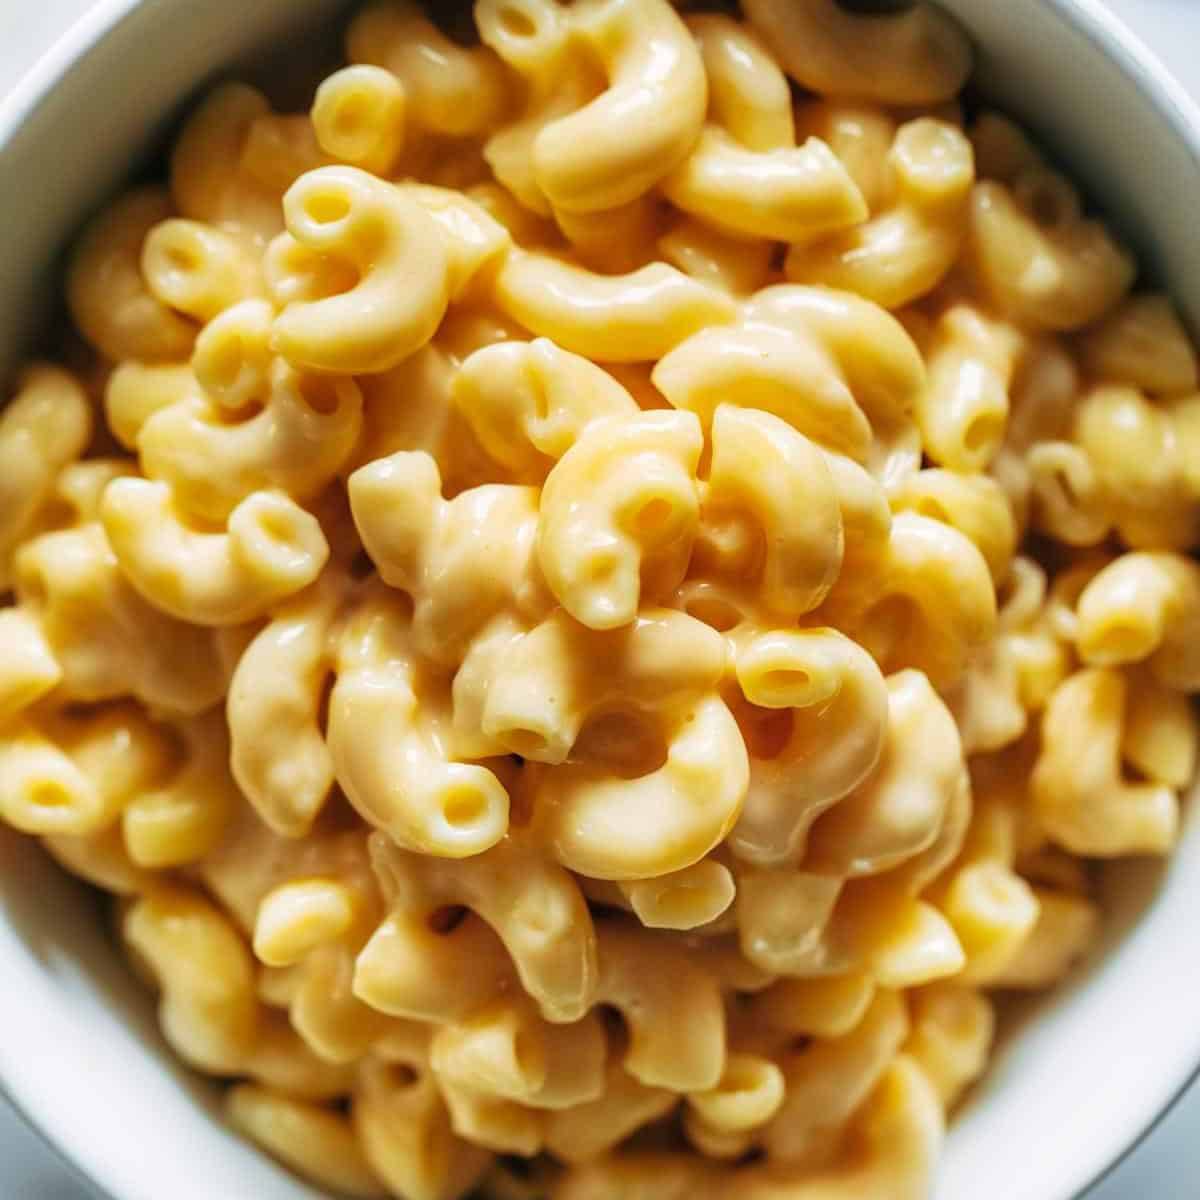 whats the best cheese combination for mac and cheese